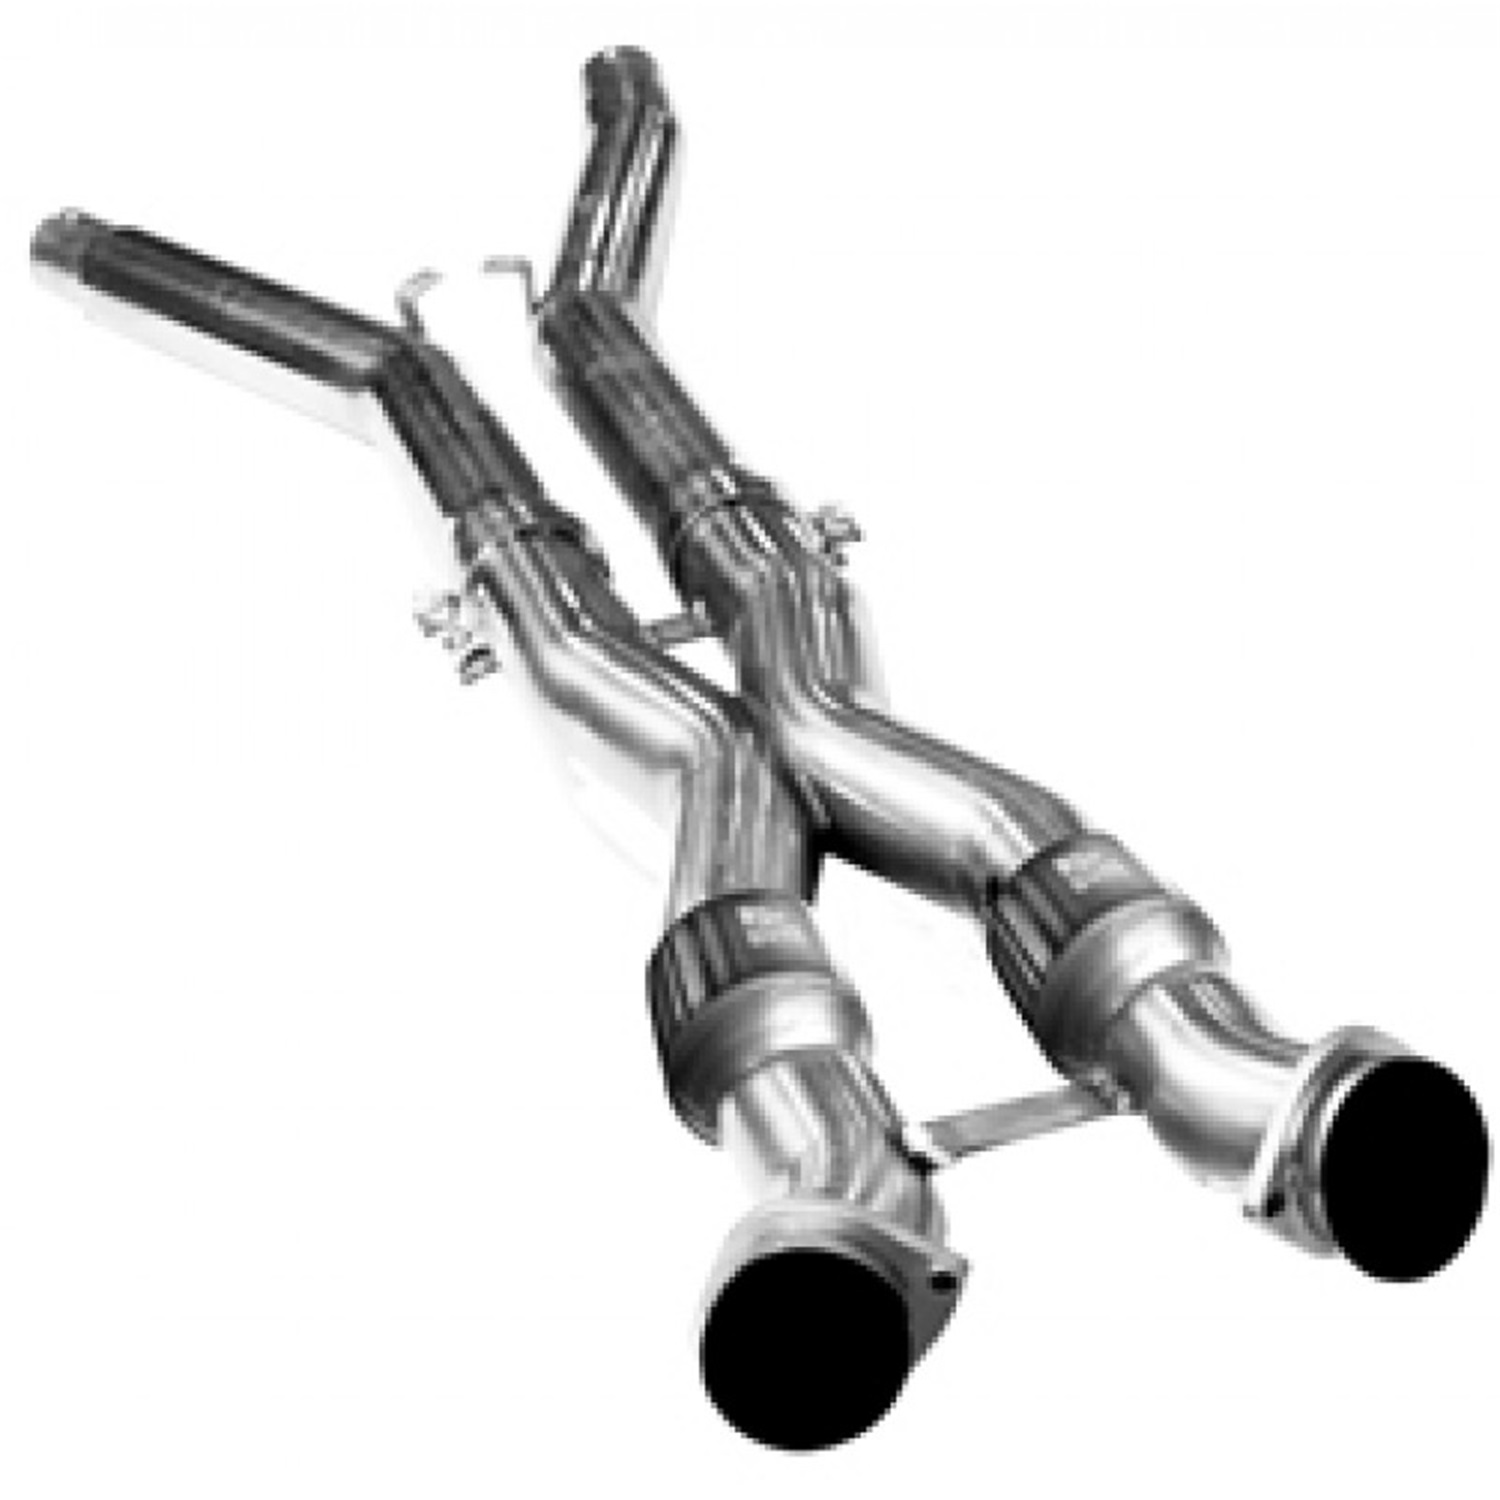 GREEN Catted X-Pipe 3 x 3" Connects To 2.5" OEM Style Exhaust Incl. 3 x 2.5" Mid-Pipes 09-13 Corvette C6 LS2/LS3 6.0L/6.2L